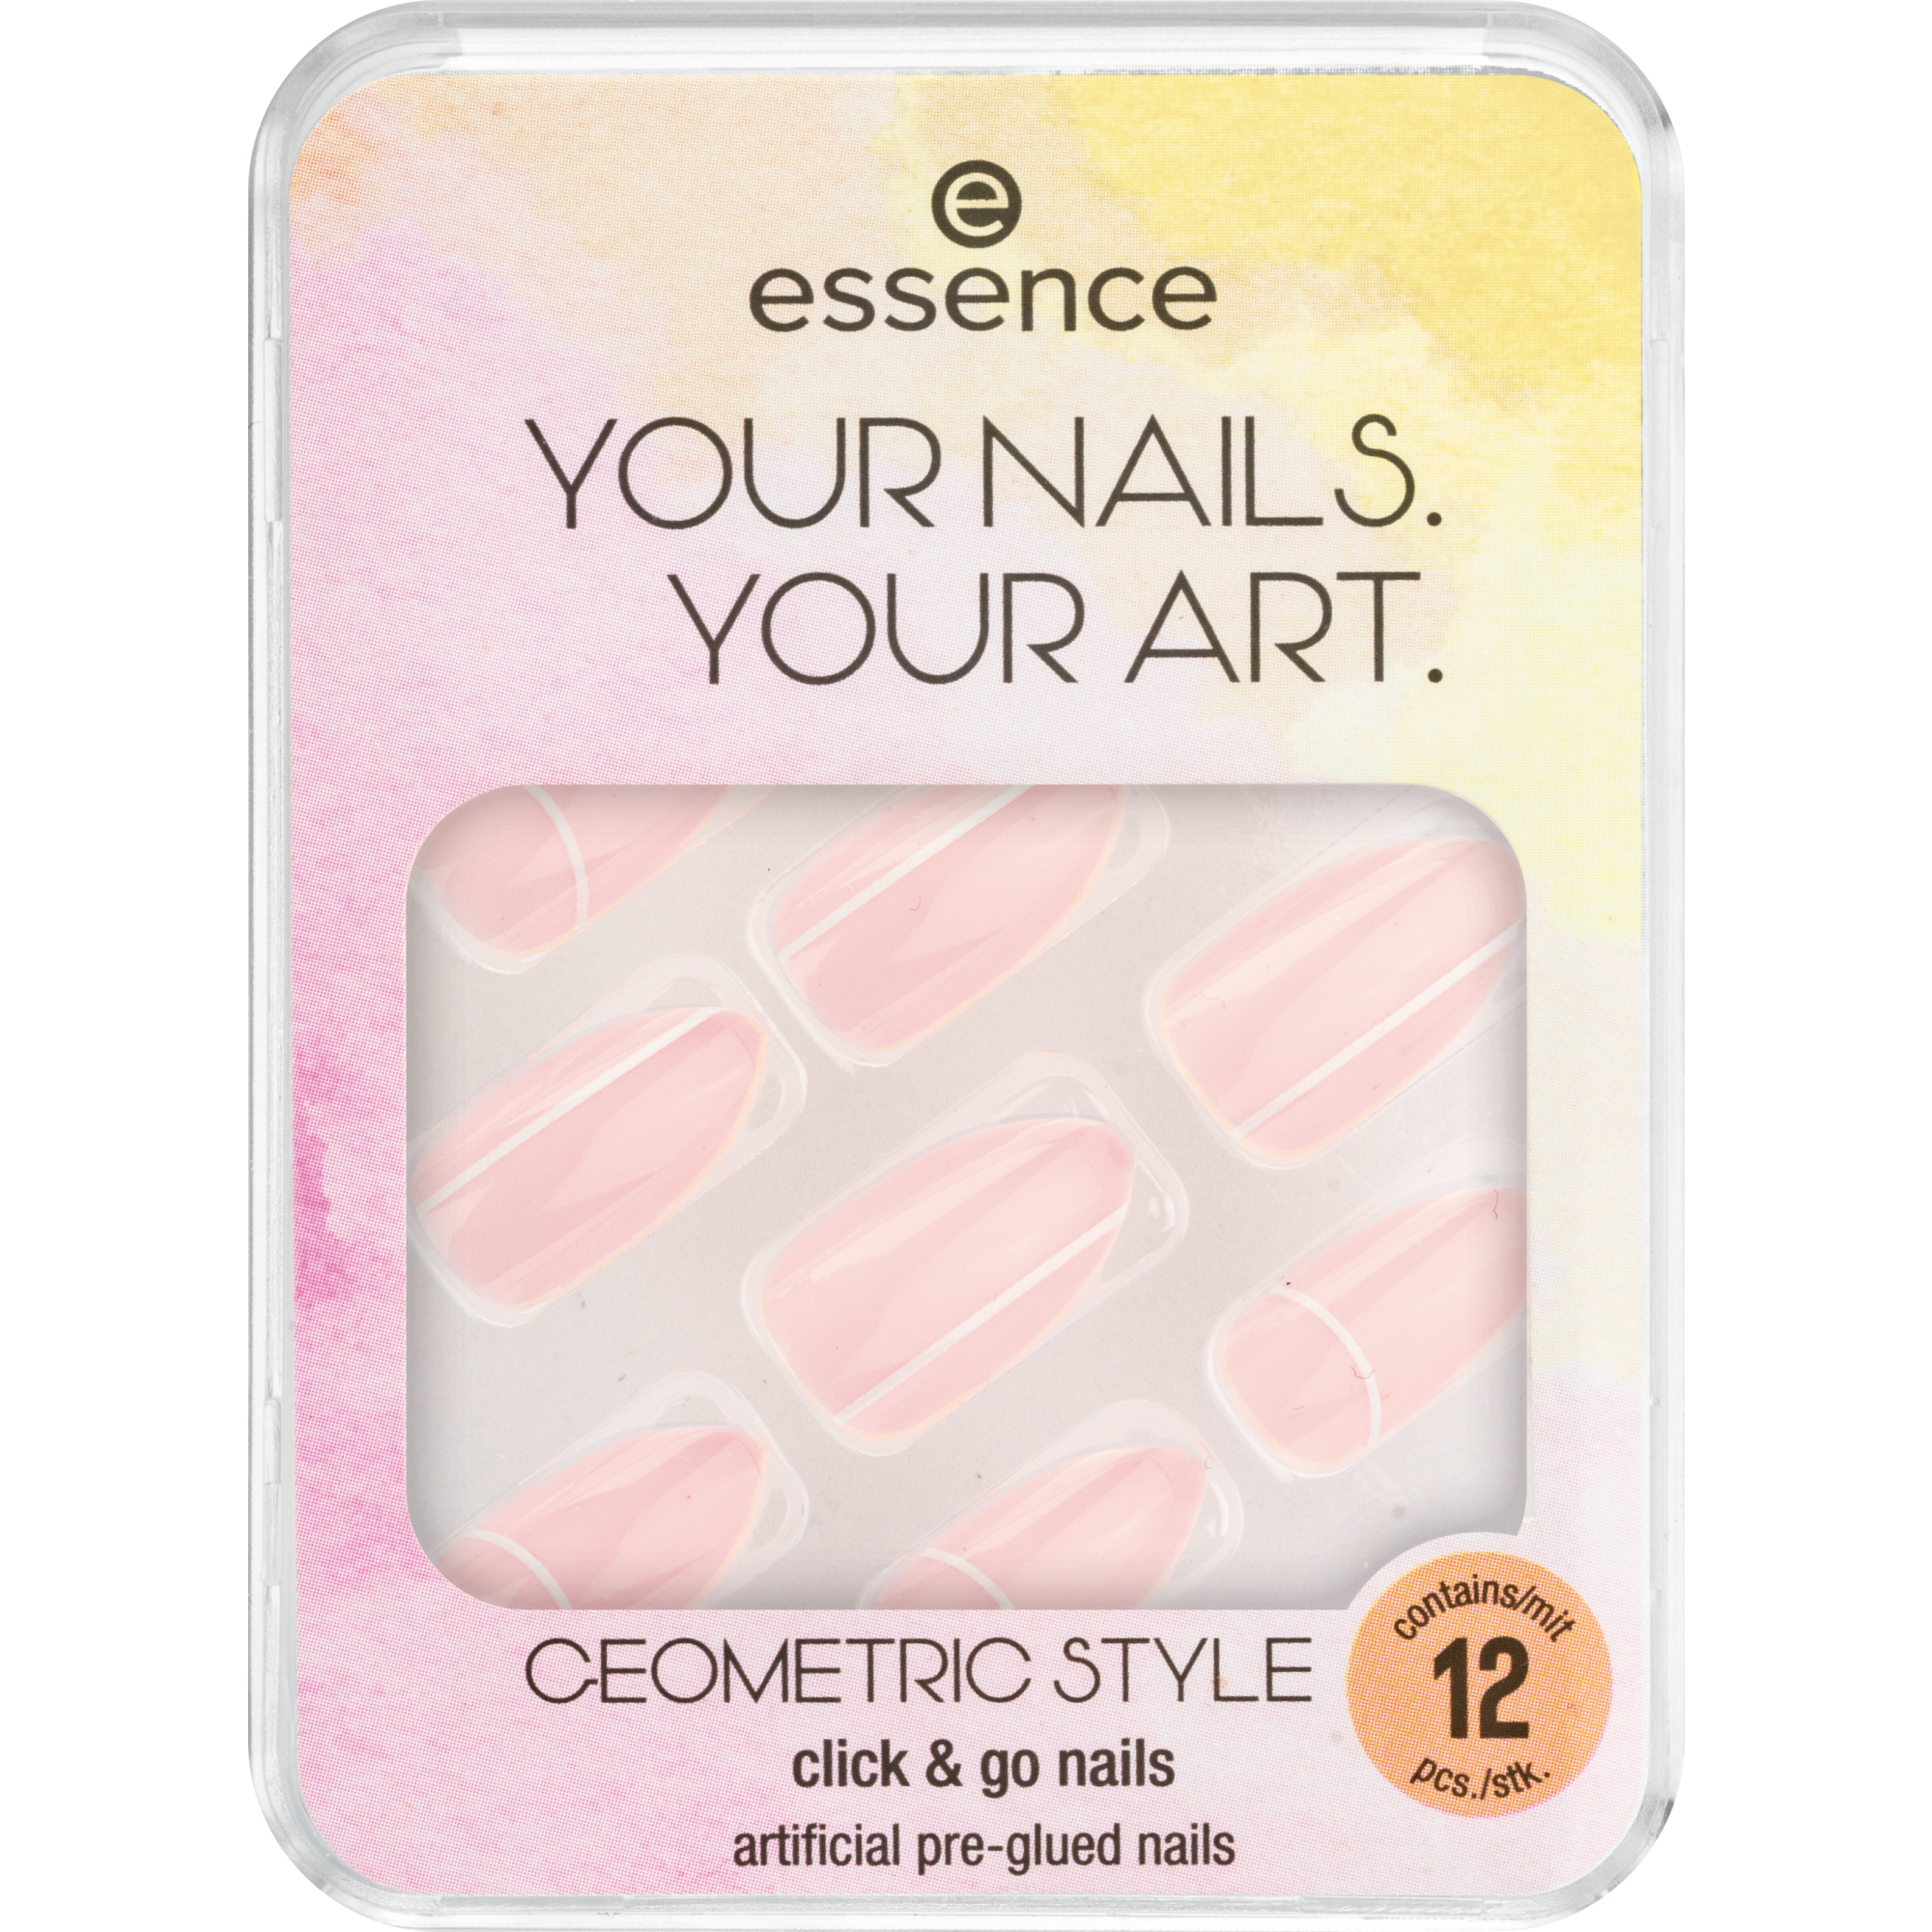 YOUR NAILS. YOUR ART. GEOMETRIC STYLE click & go nails